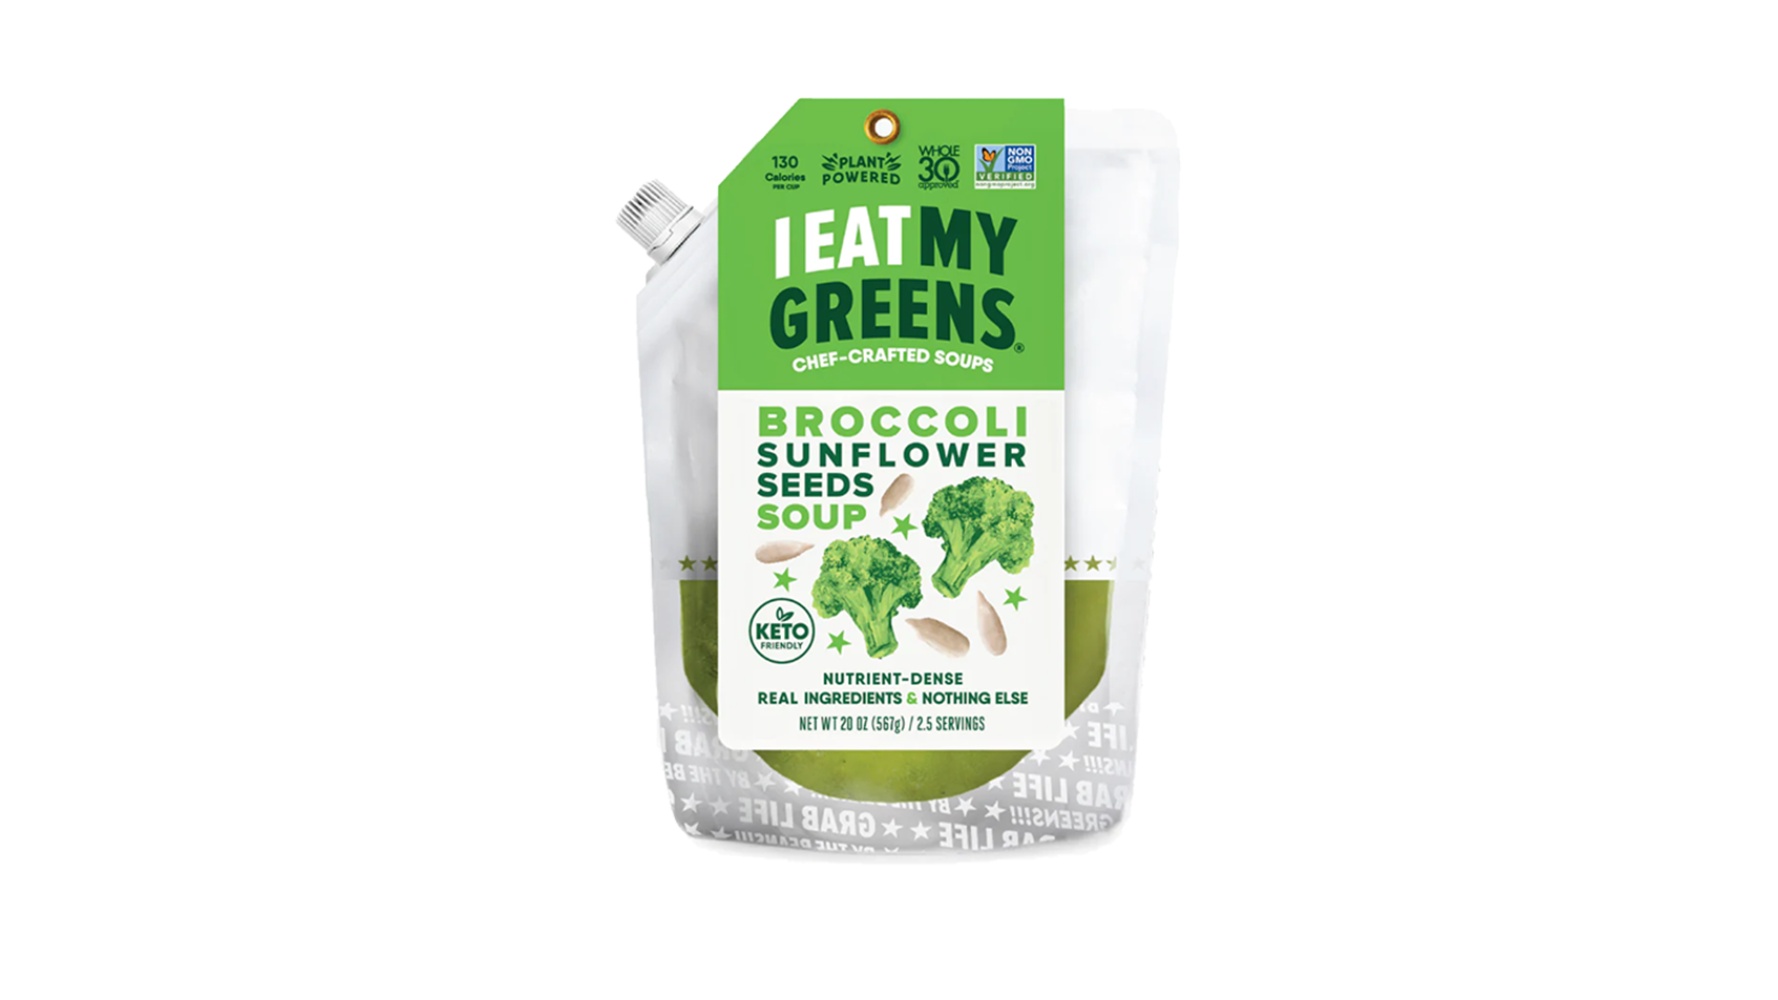 03-eat-my-greens-broccoli-sunflower-seeds.png